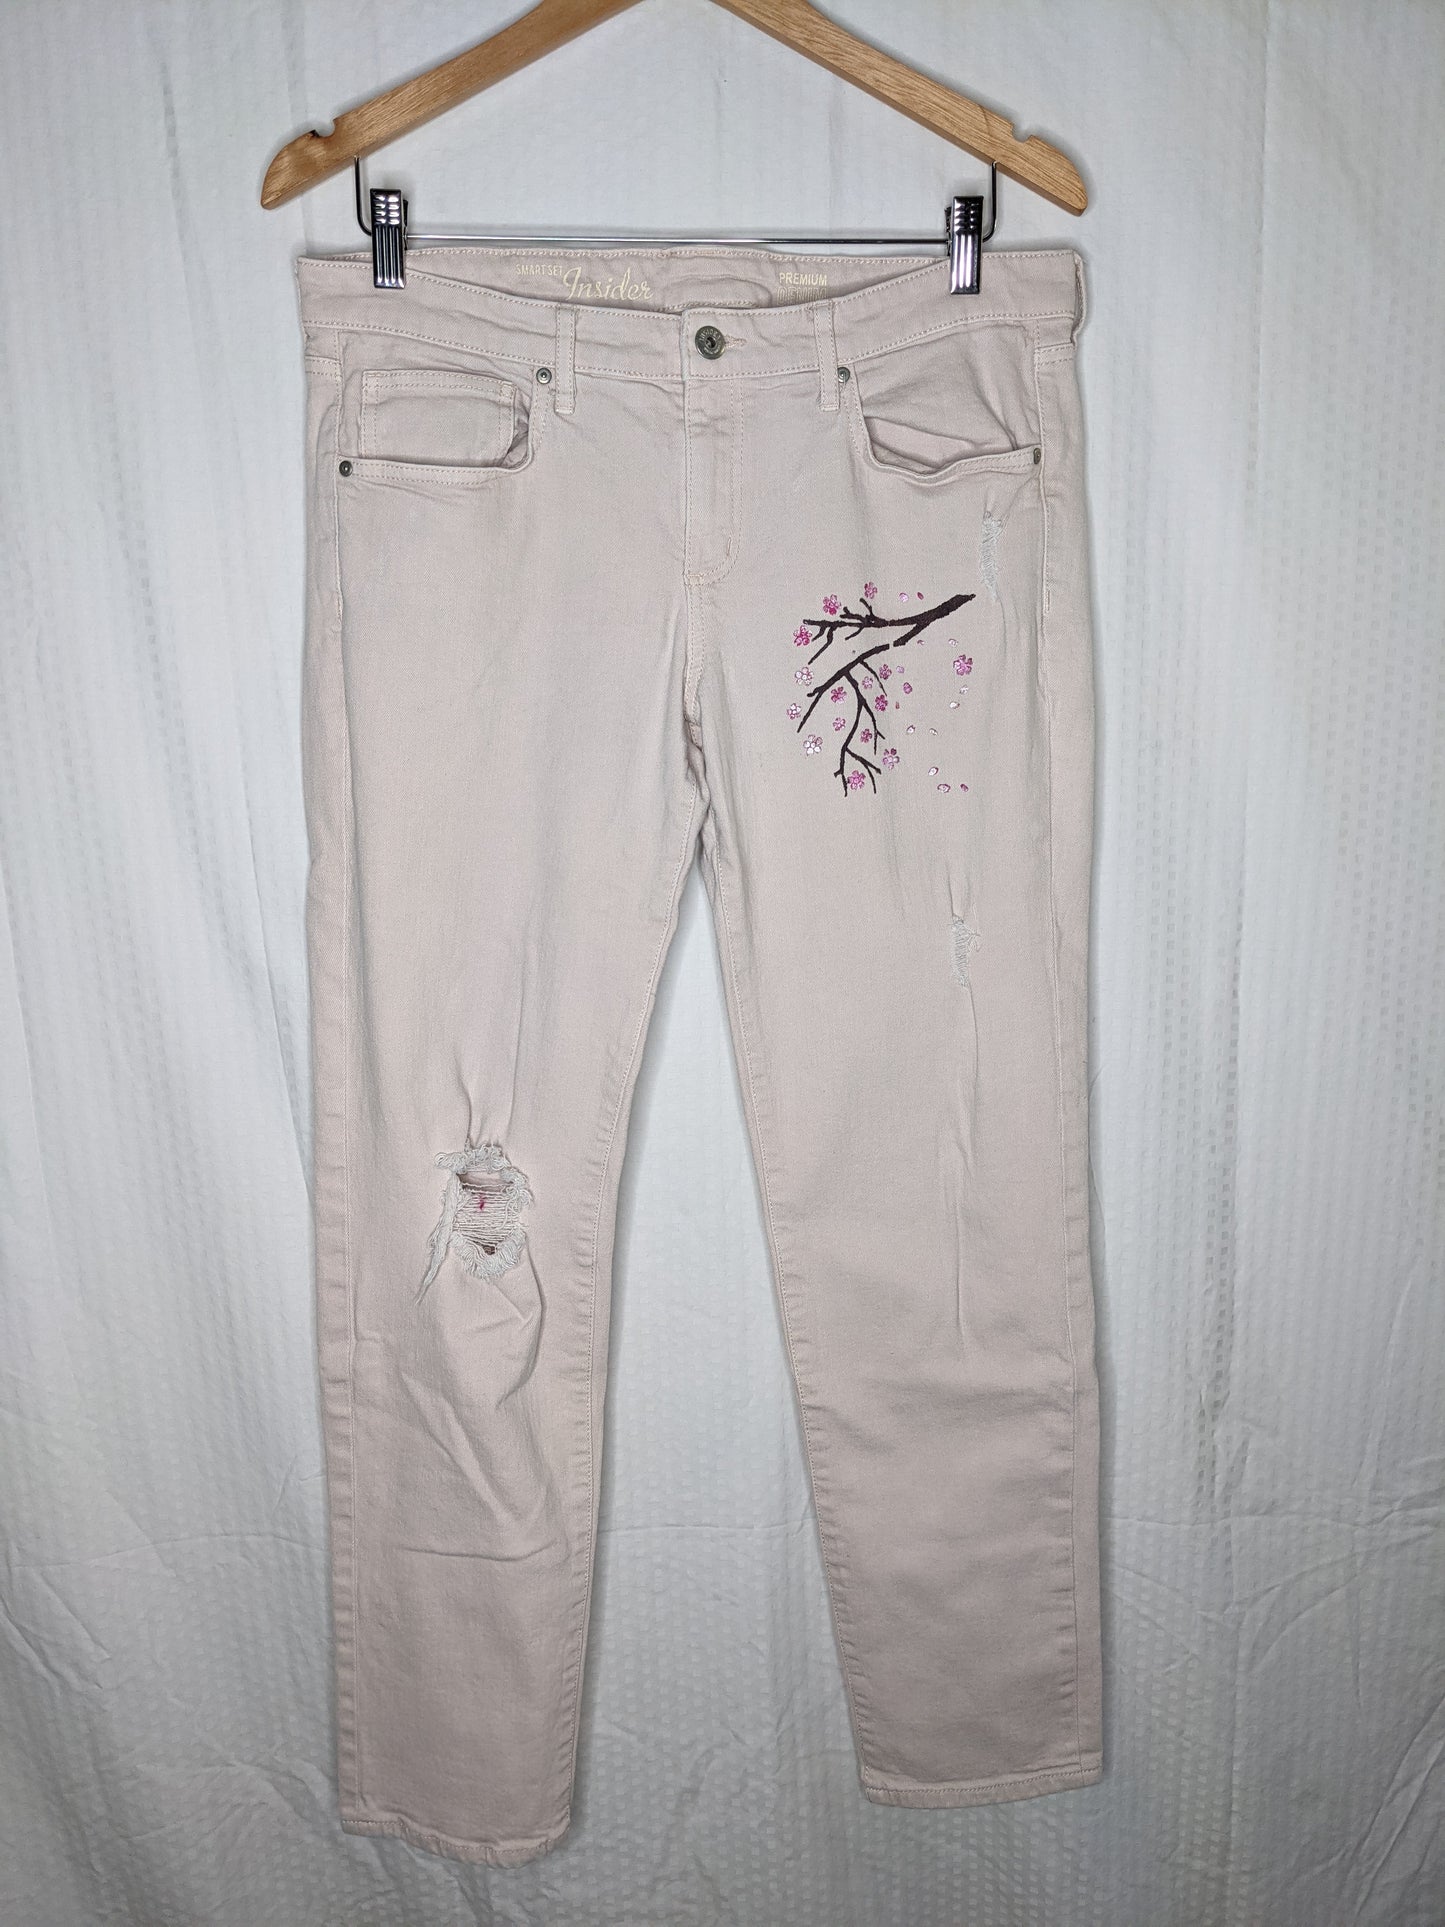 Upcycled Light Pink Painted Cherry Blossom Skinny Jeans -  Size 31